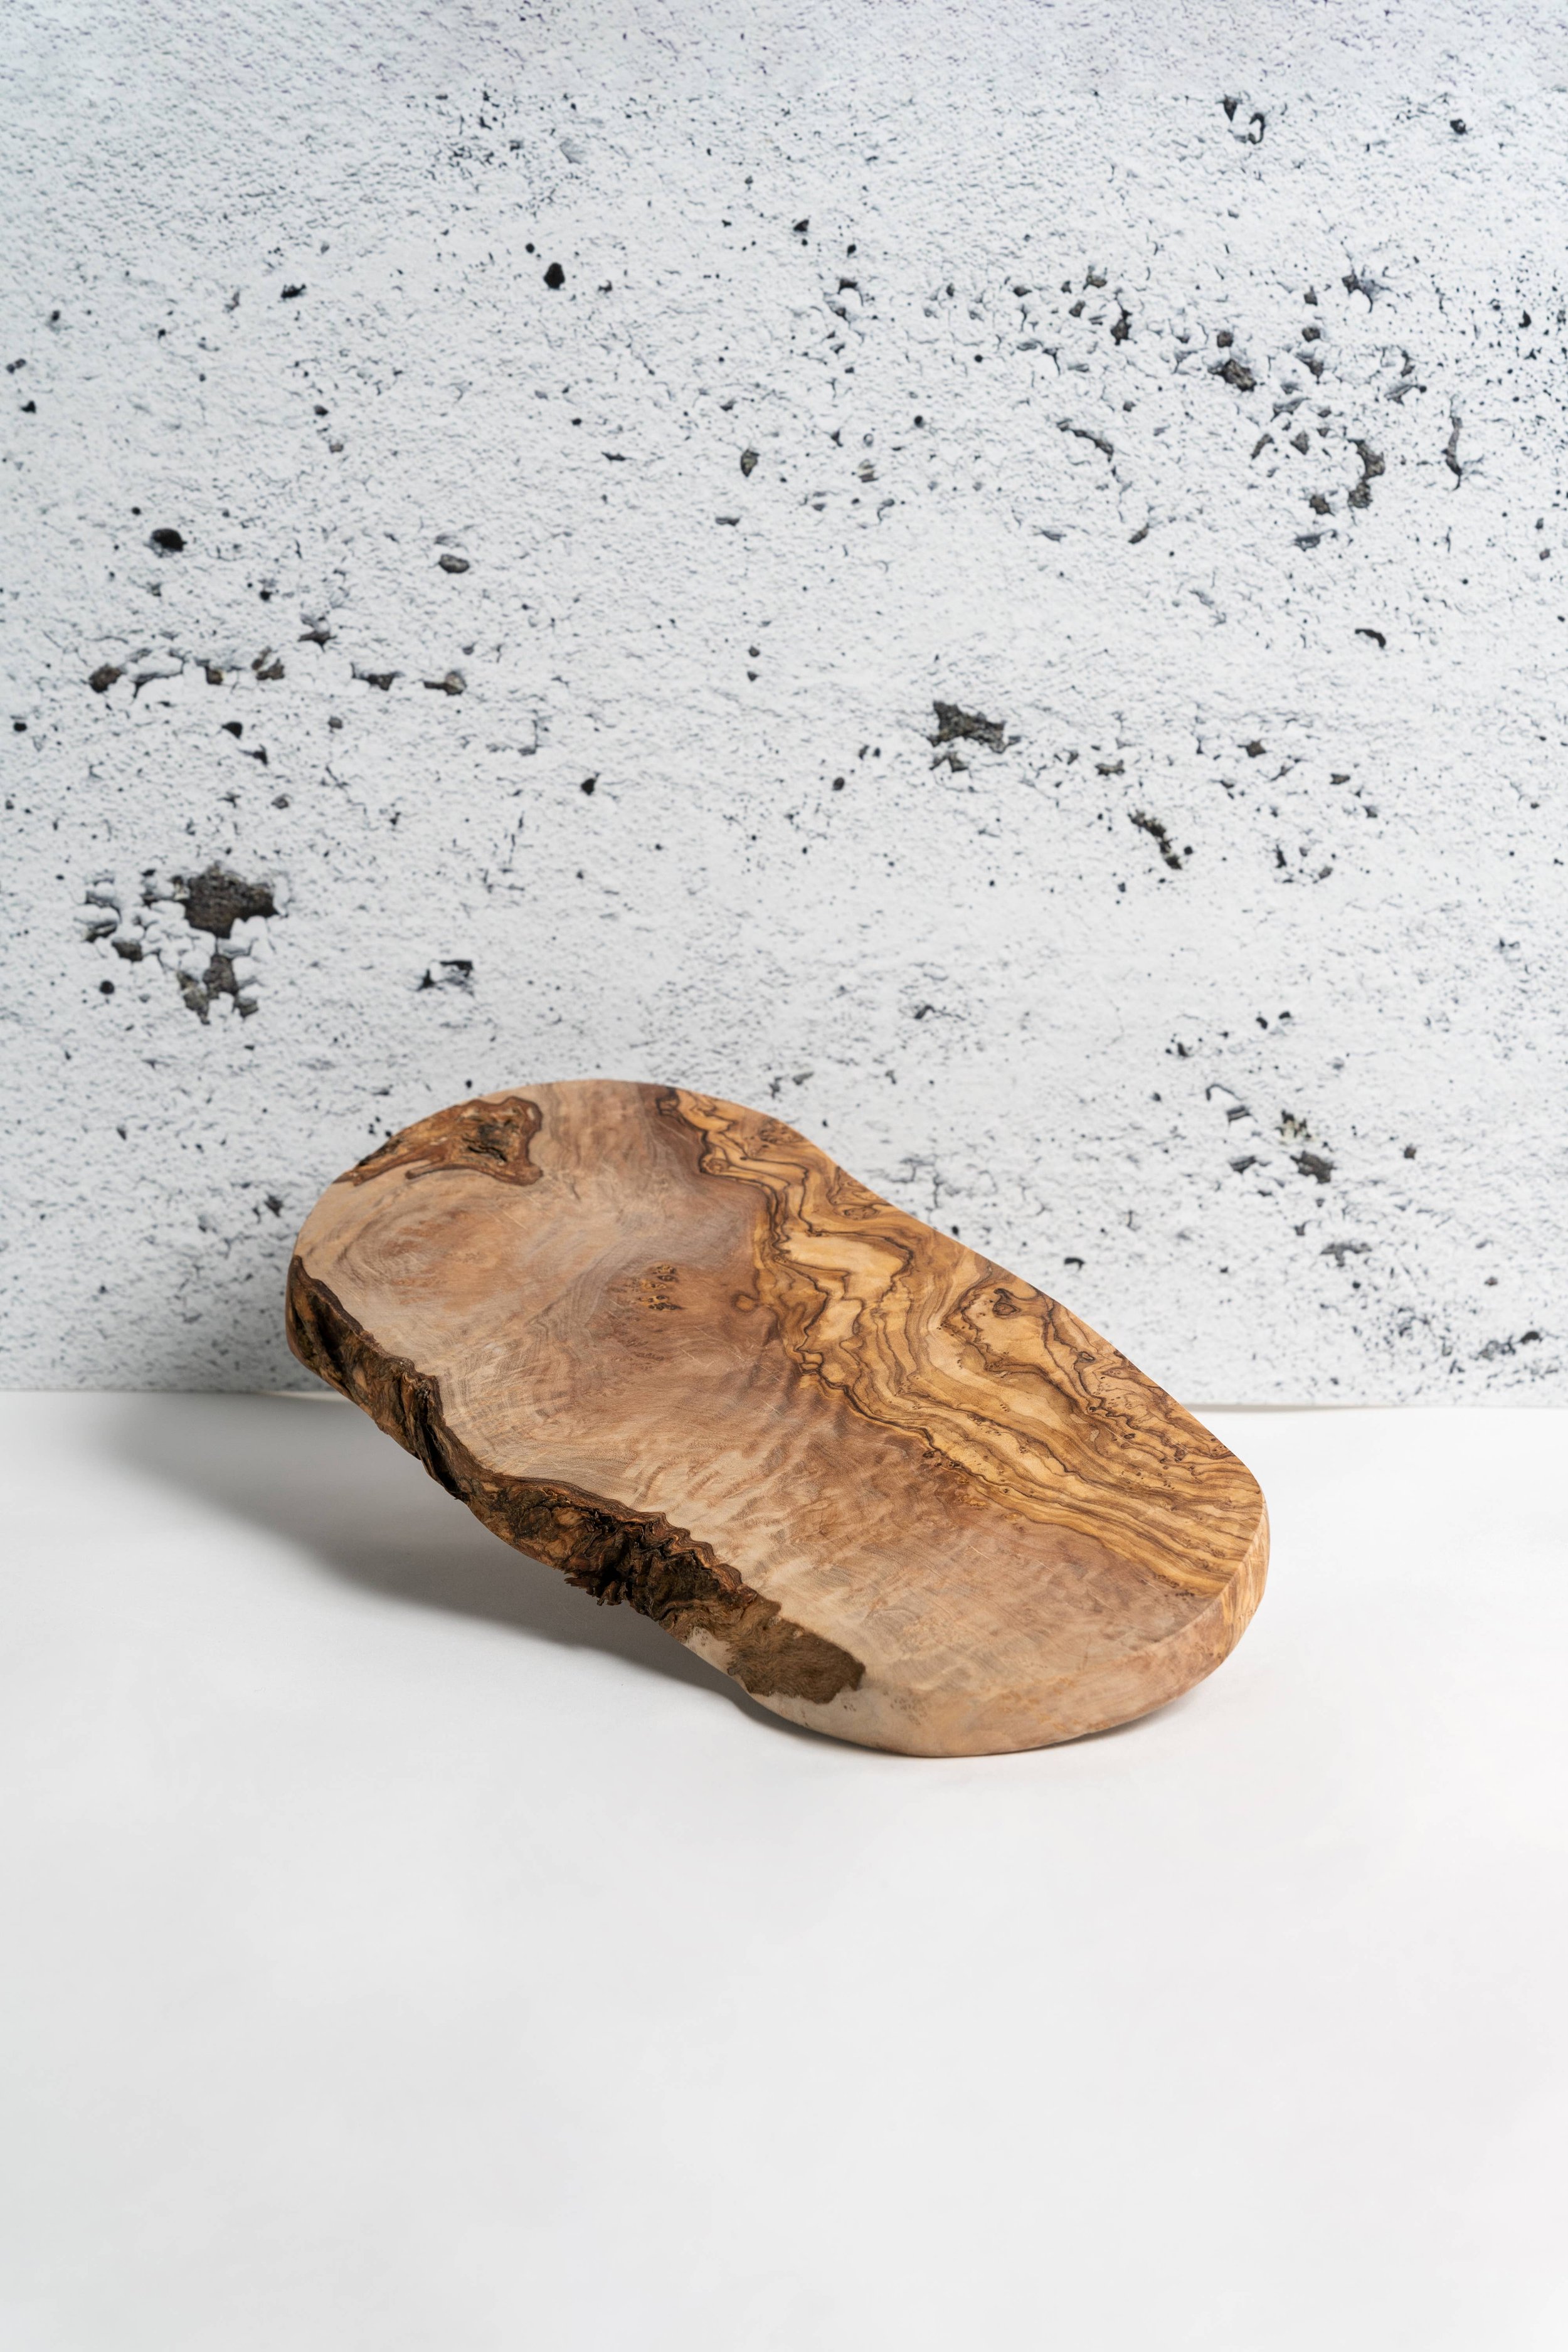 Rustic Olive Wood Cheese Board - $38.00